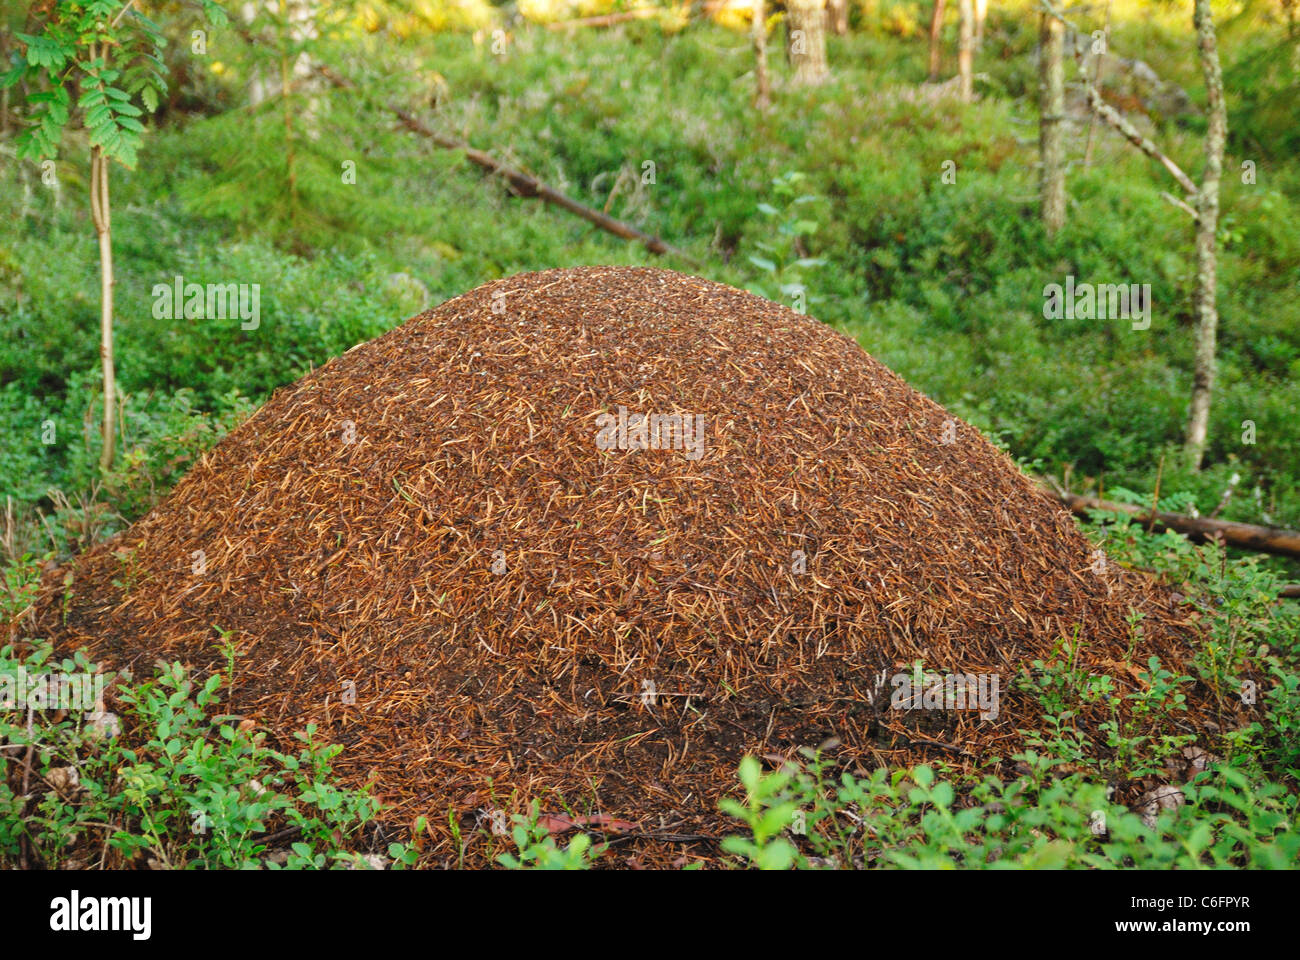 Enormous Wood Ant nest (Formica rufa) in a Swedish forest Stock Photo